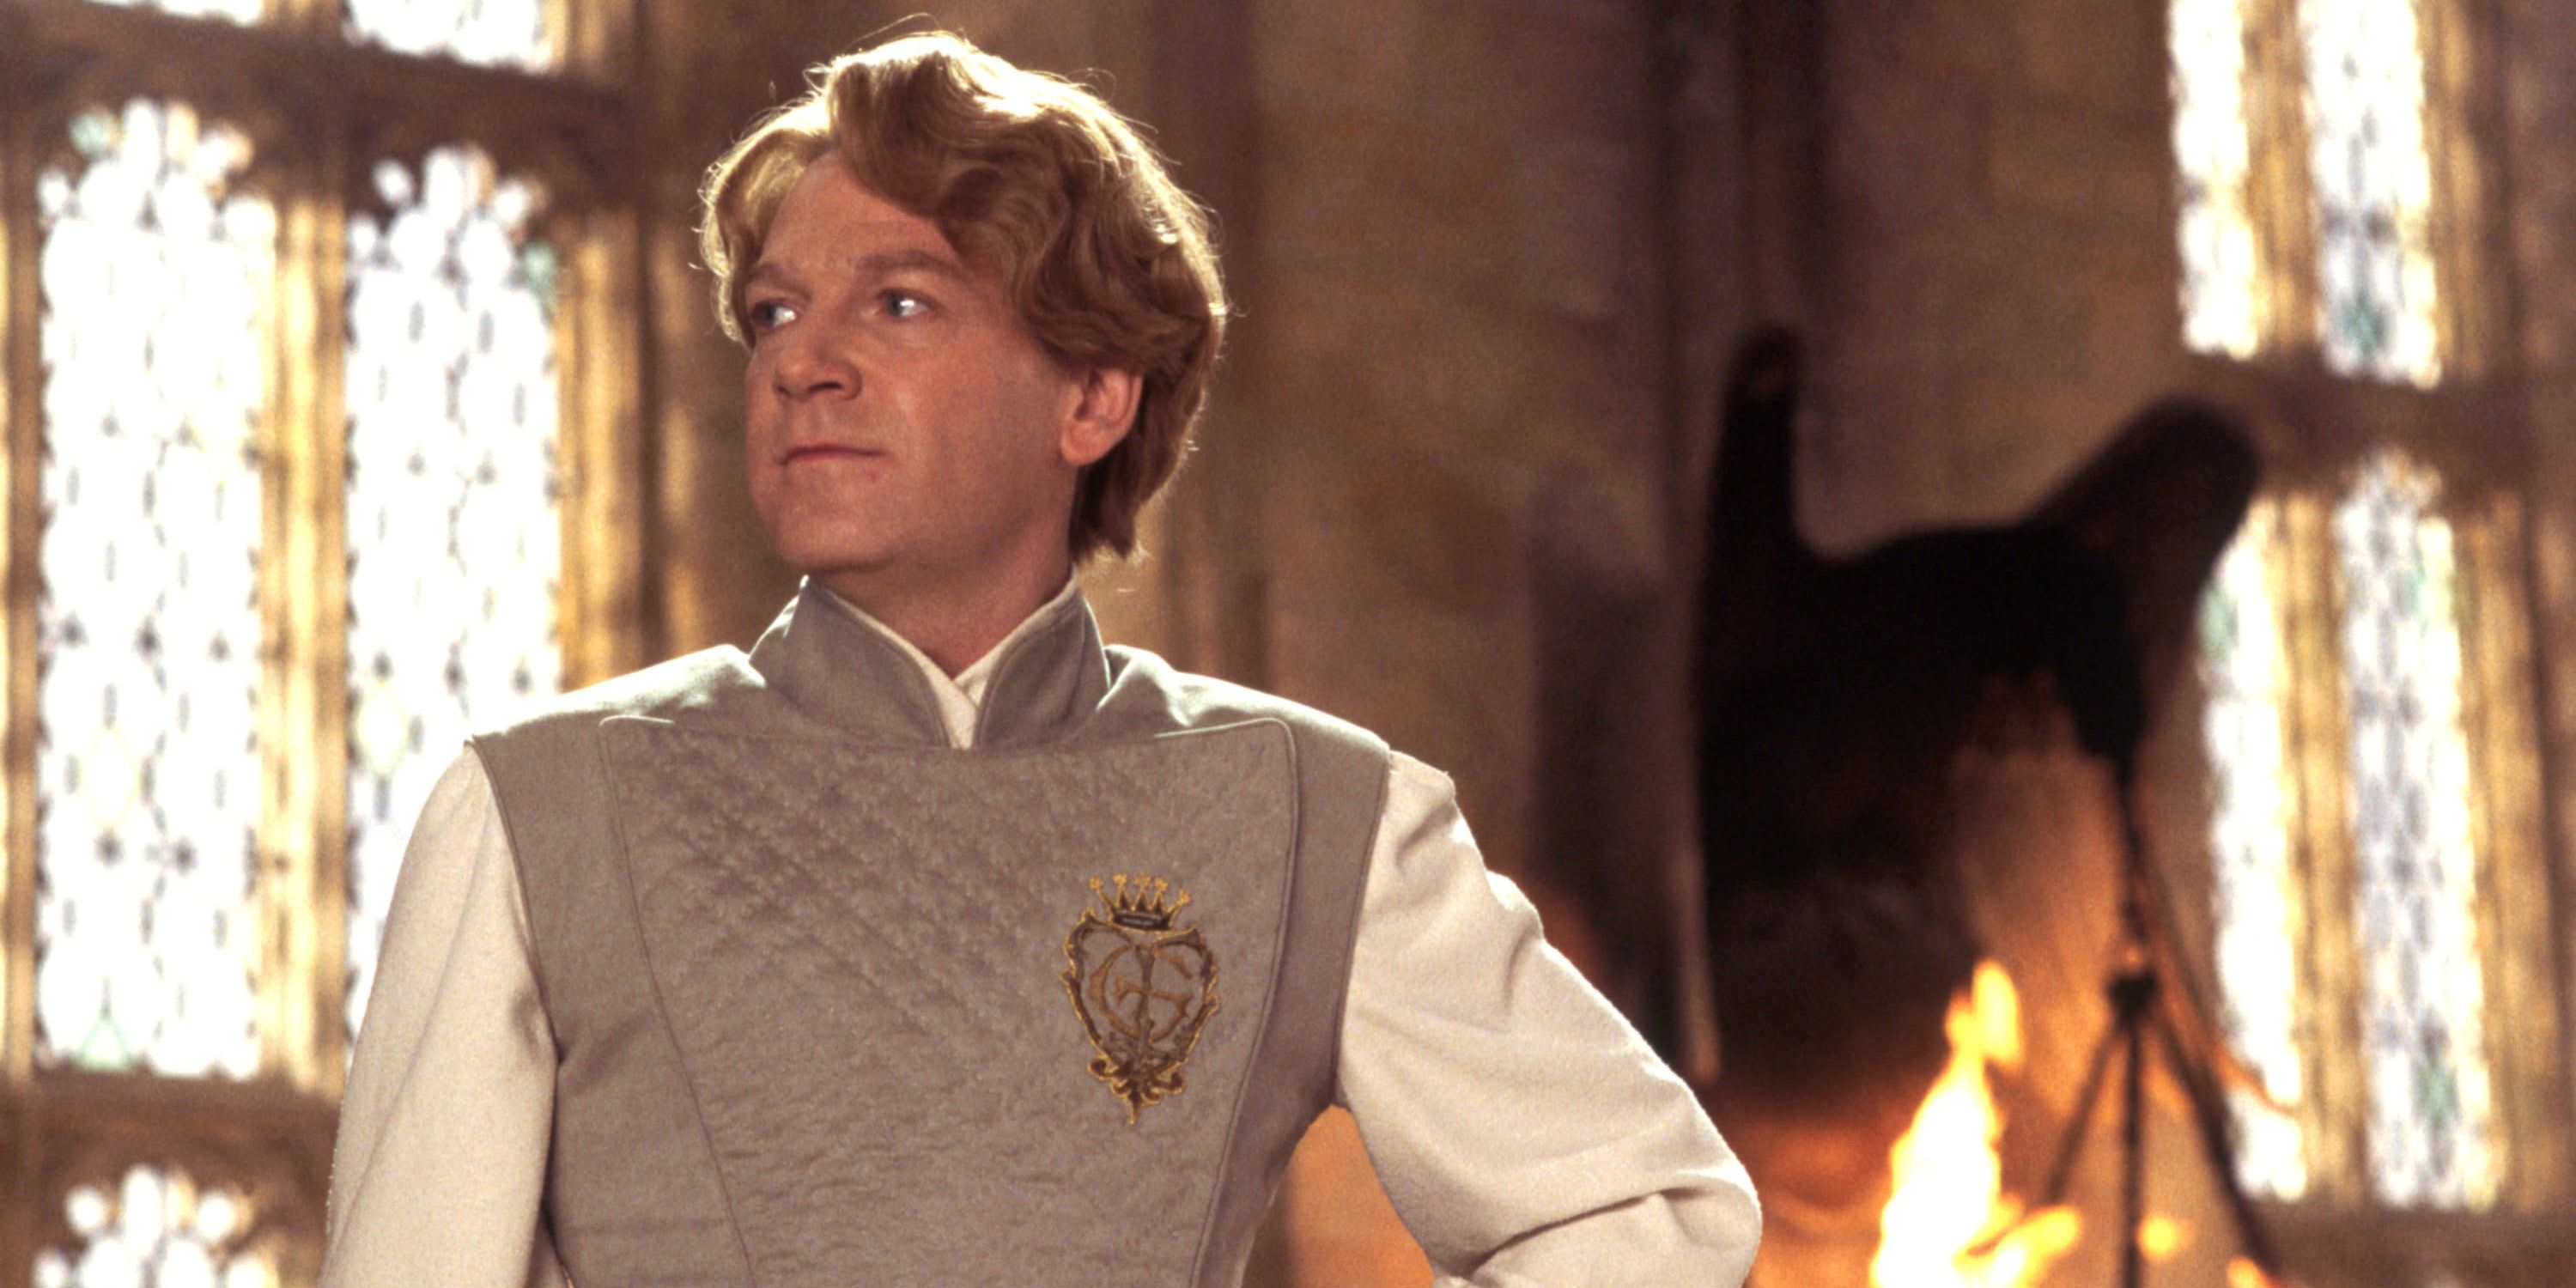 Gilderoy Lockhart teaches defence against the dark arts by using cornish pixies